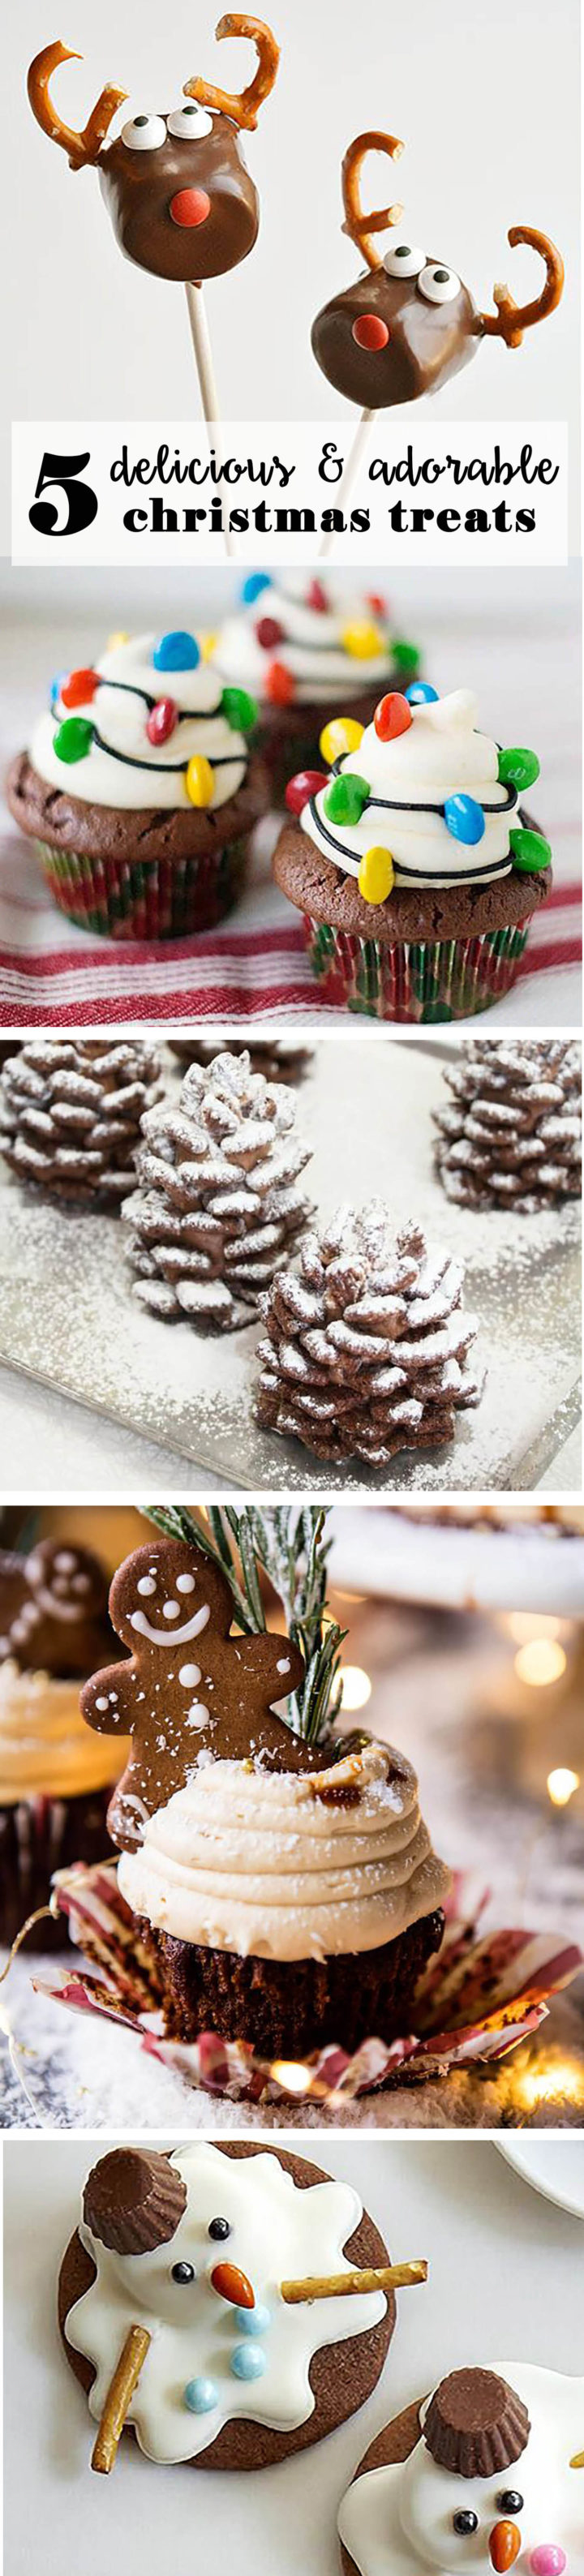 delicious and adorable christmas treats